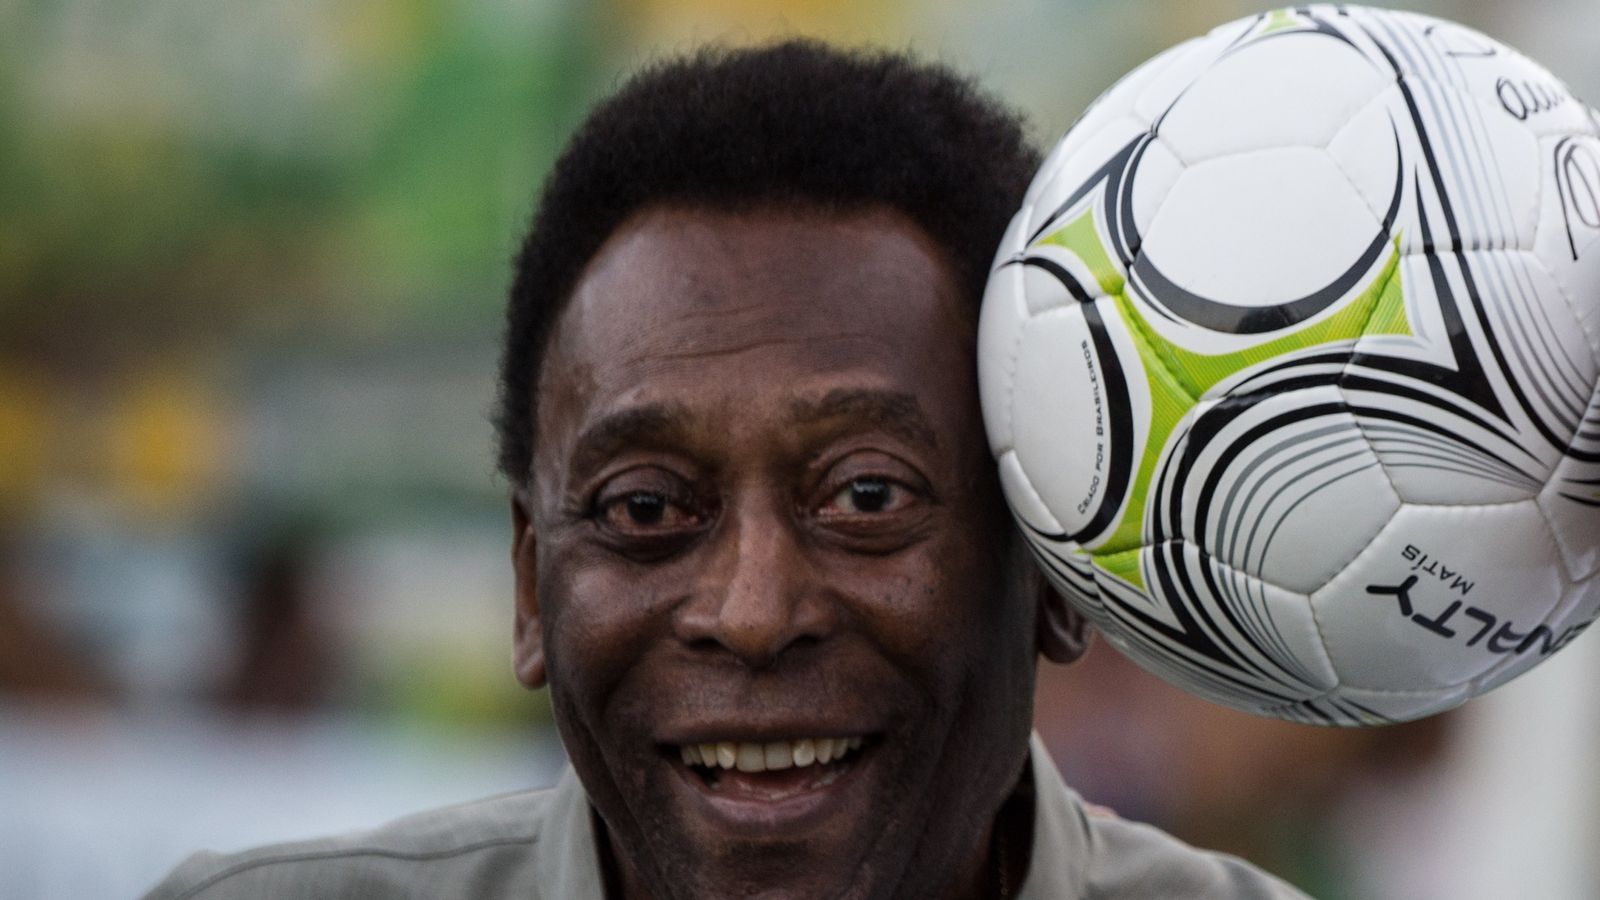 Football legend Pele 'taken to hospital' in Paris with 'strong fever